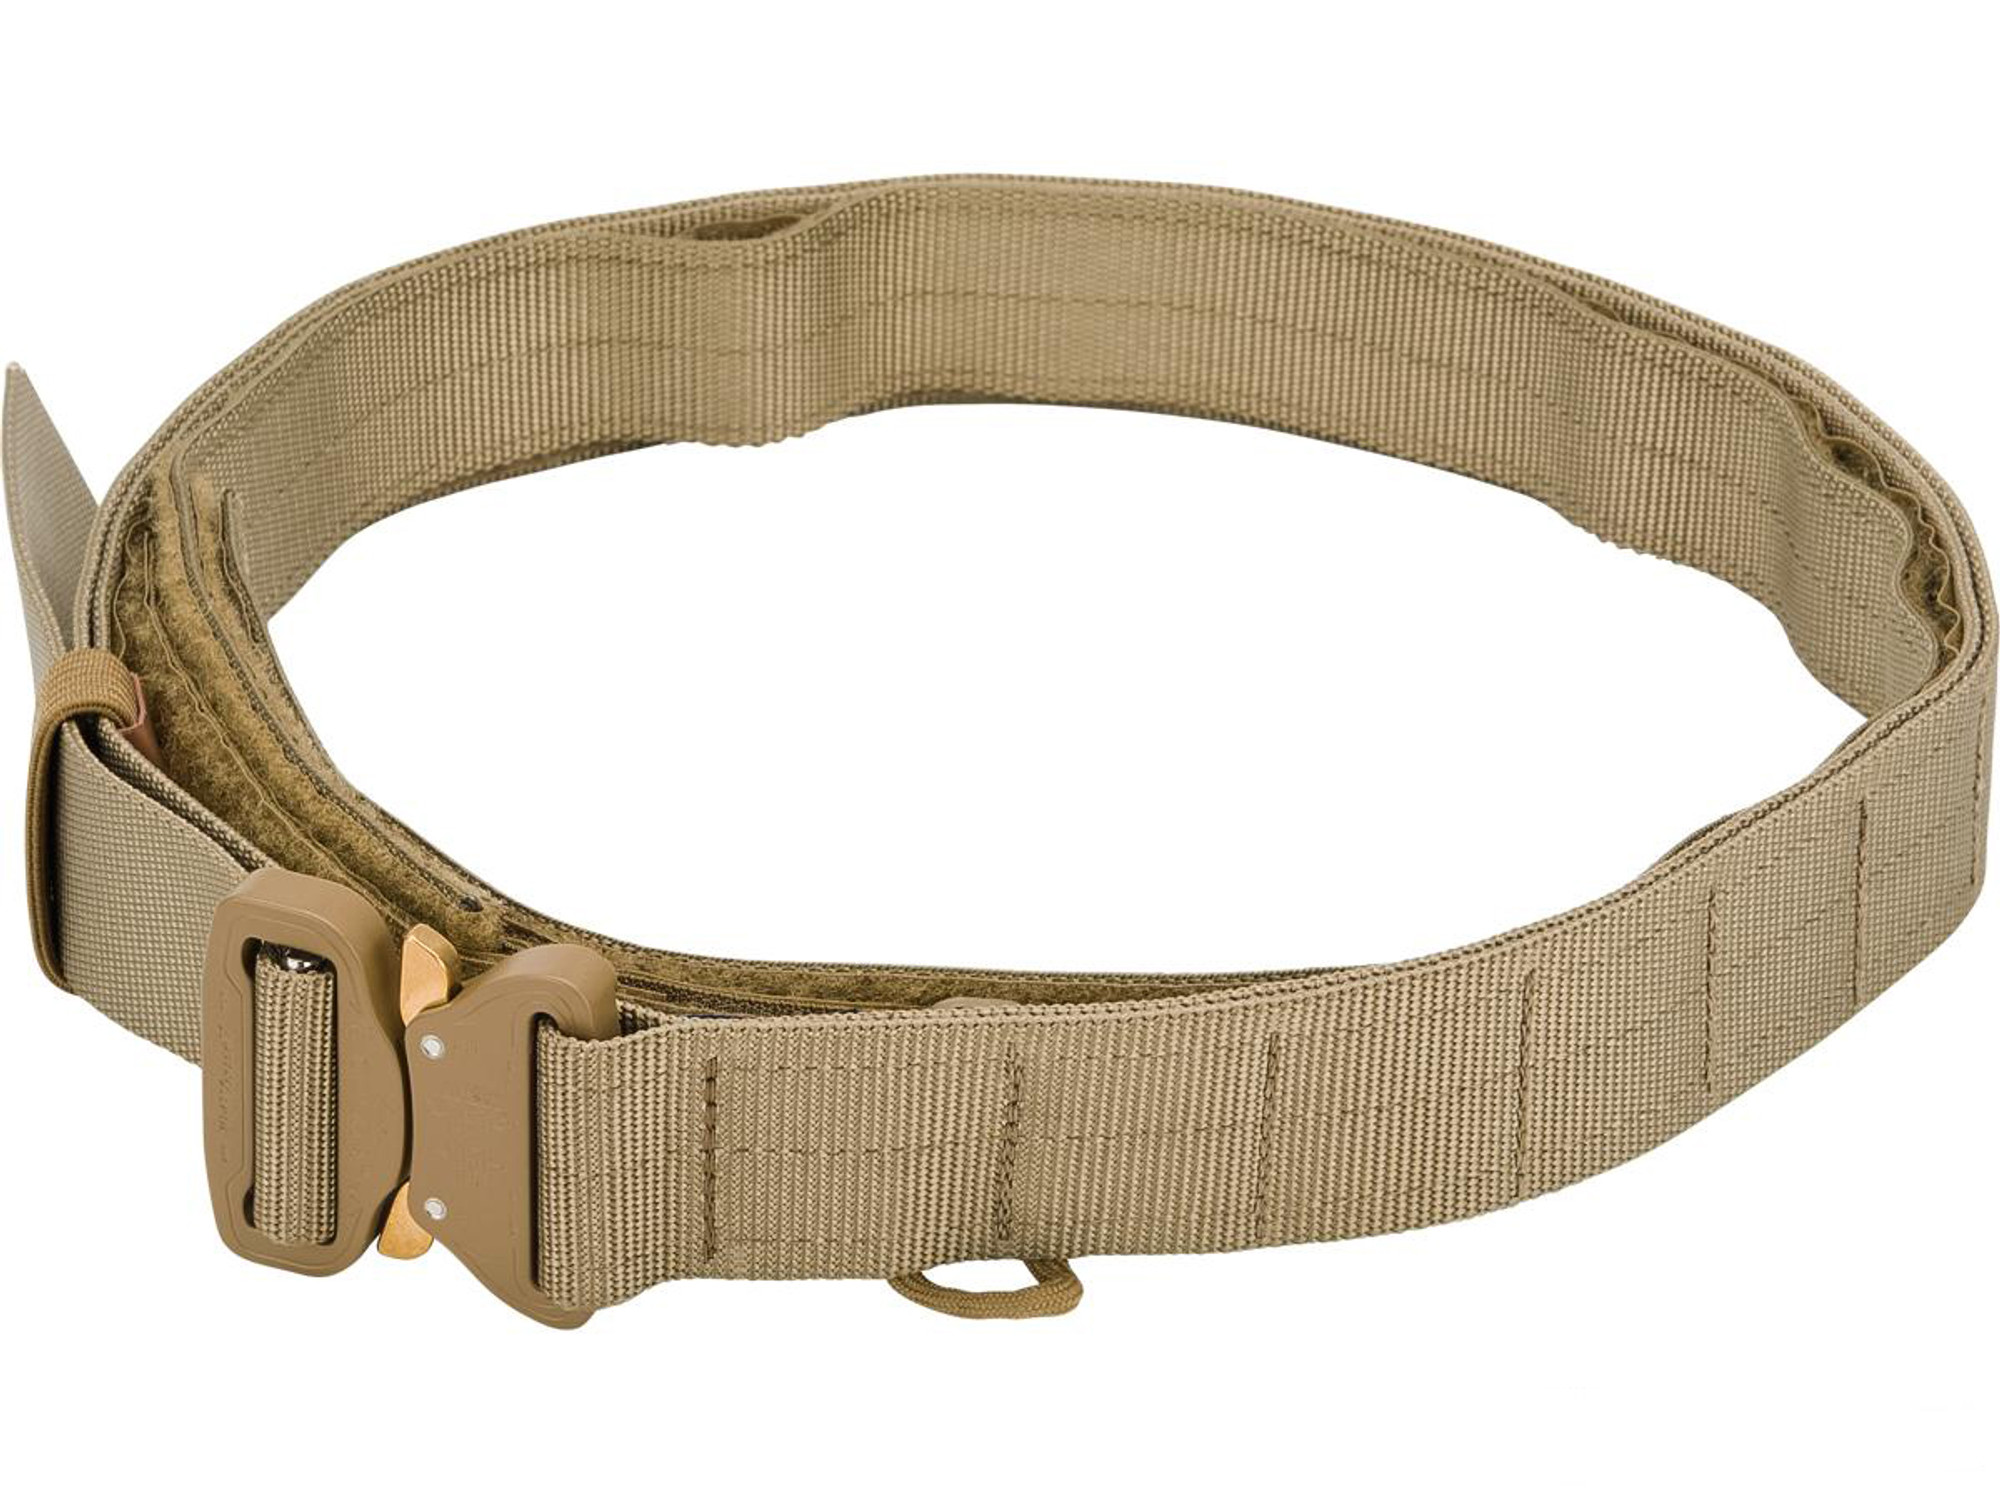 G-Code Contact Series 1.75" Operator Belt (Color: Coyote / Small)